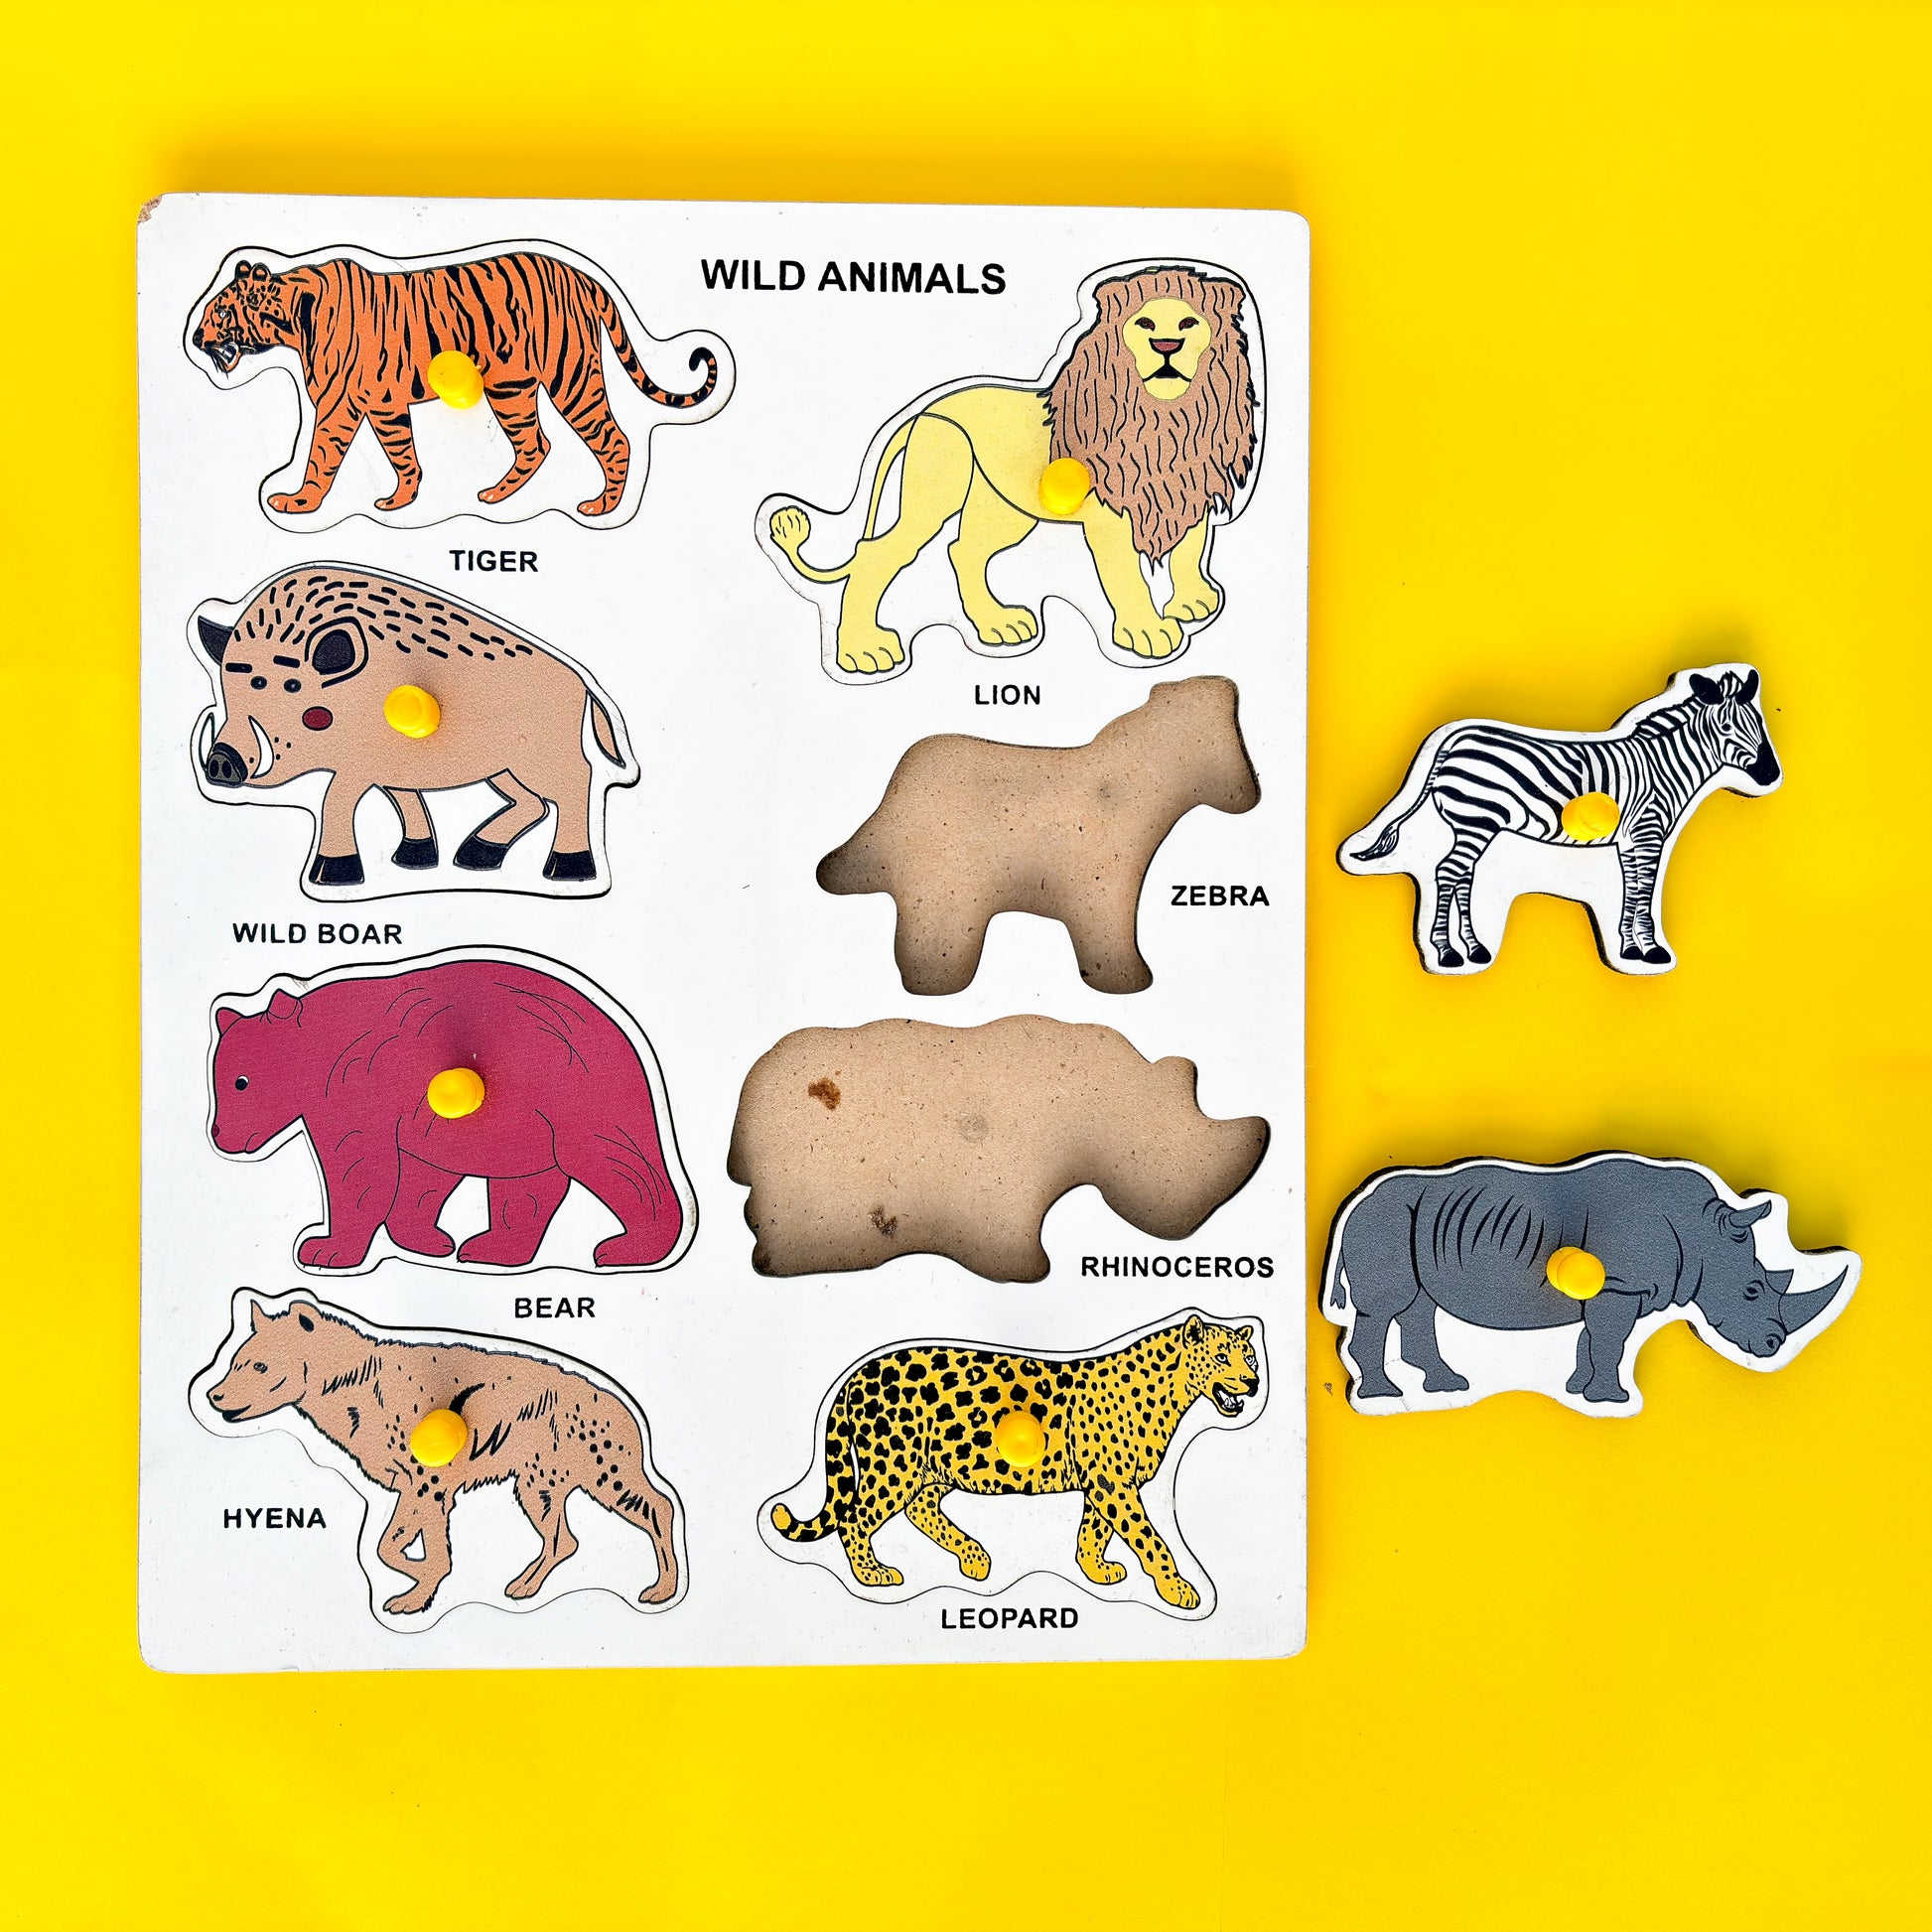 Wooden puzzle with wild animals on a yellow background. The animals include a tiger, lion, wild boar, zebra, bear, rhinoceros, hyena, and leopard.